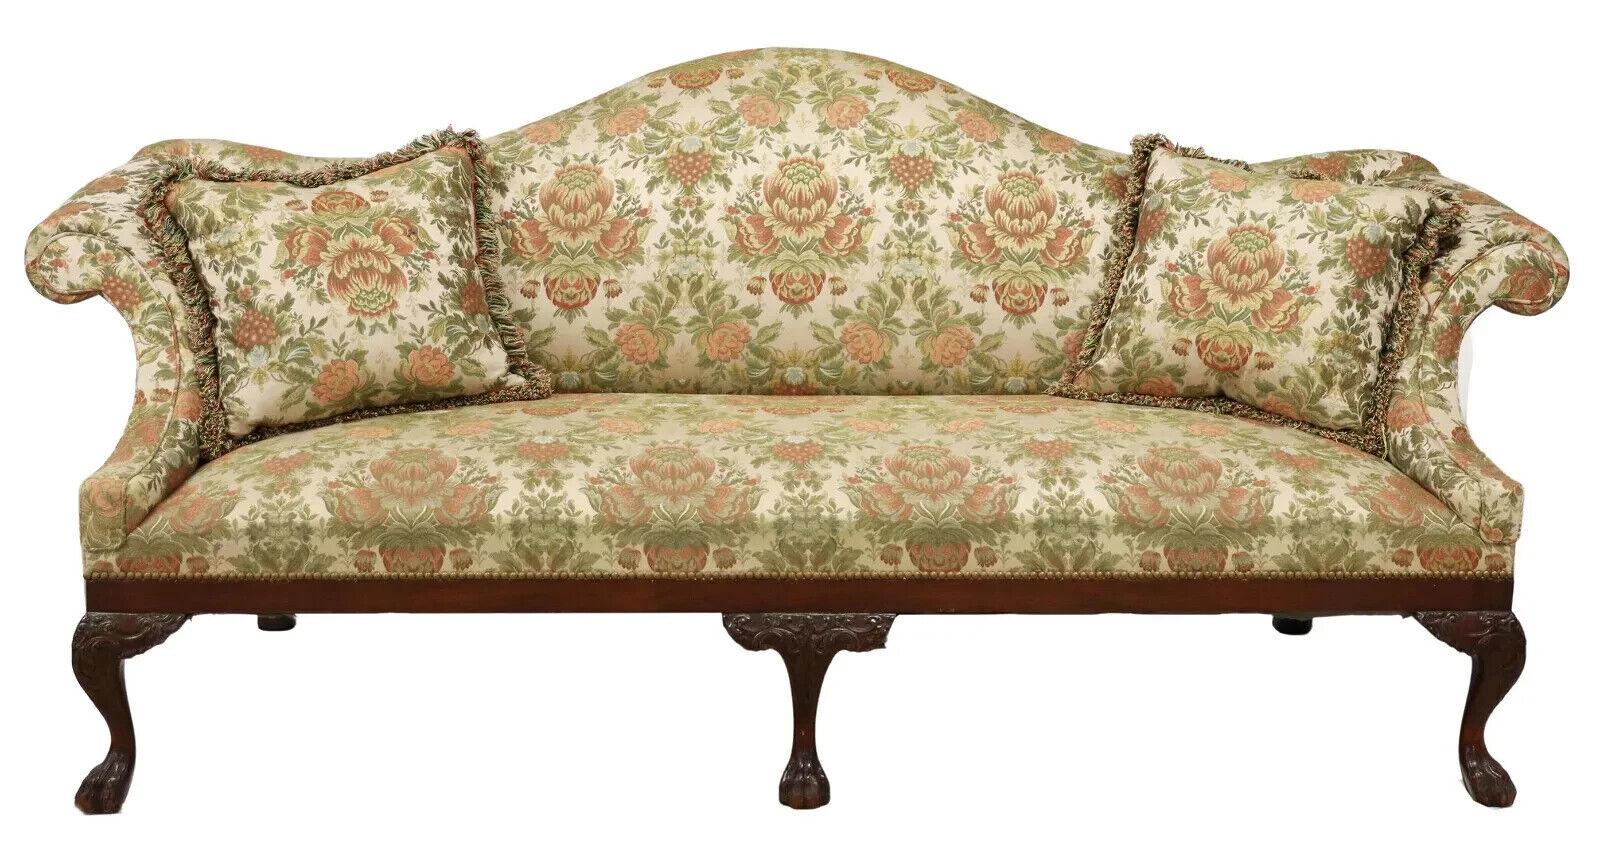 antique sofa styles guide